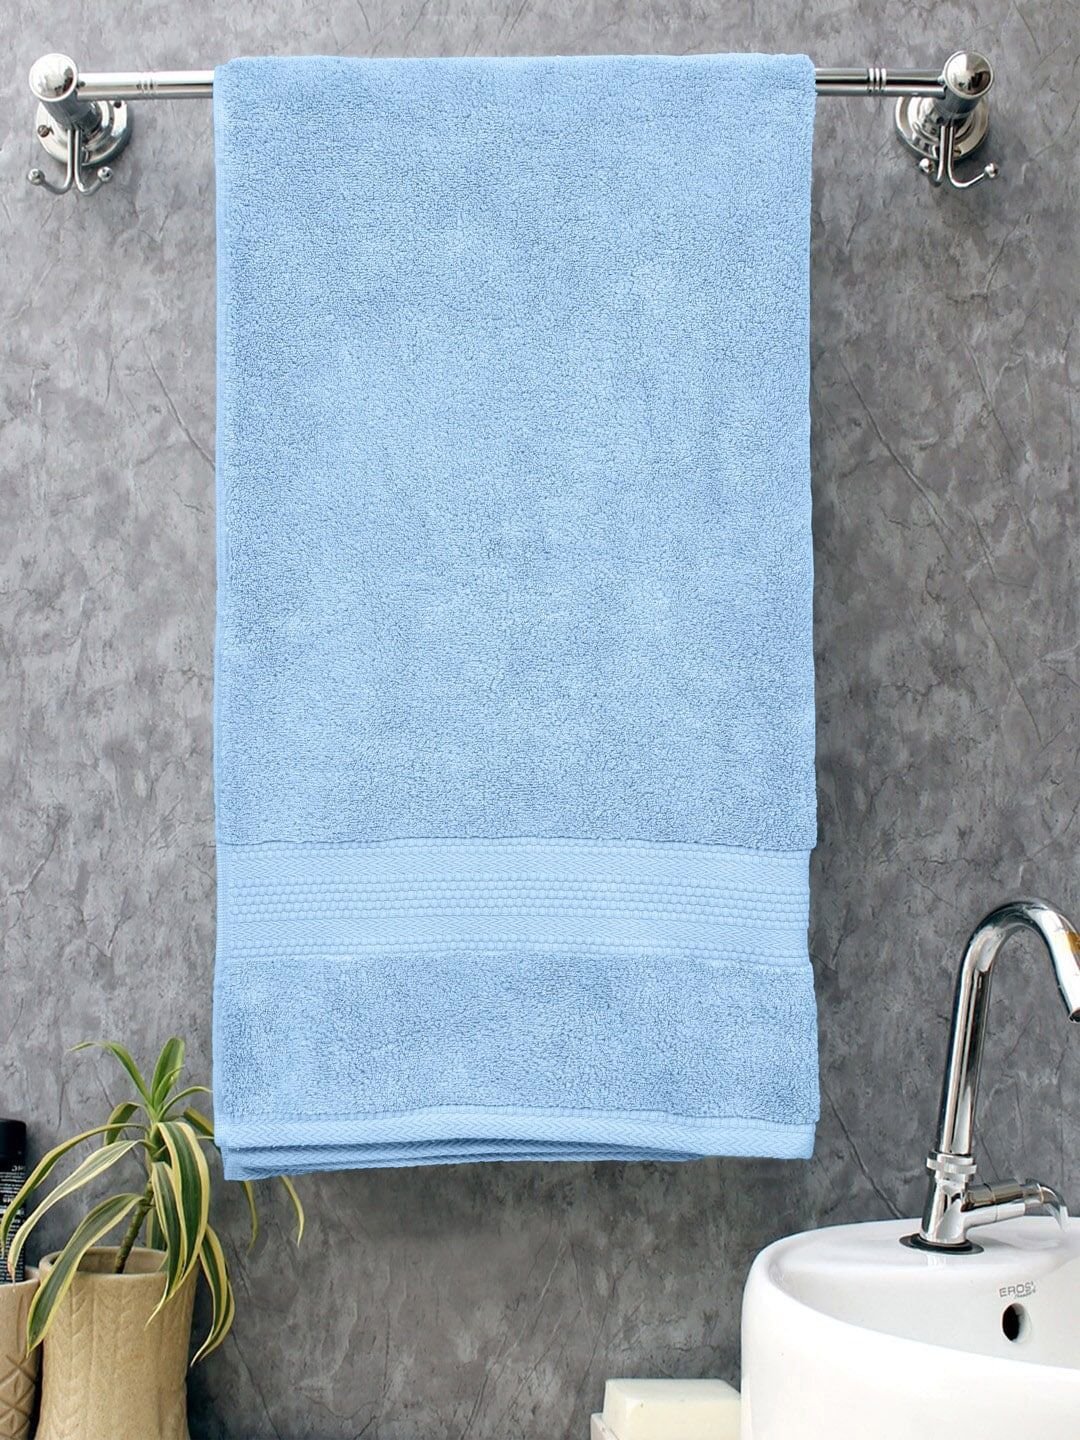 BOMBAY DYEING Blue Solid 650 GSM Cotton Bath Towel Price in India